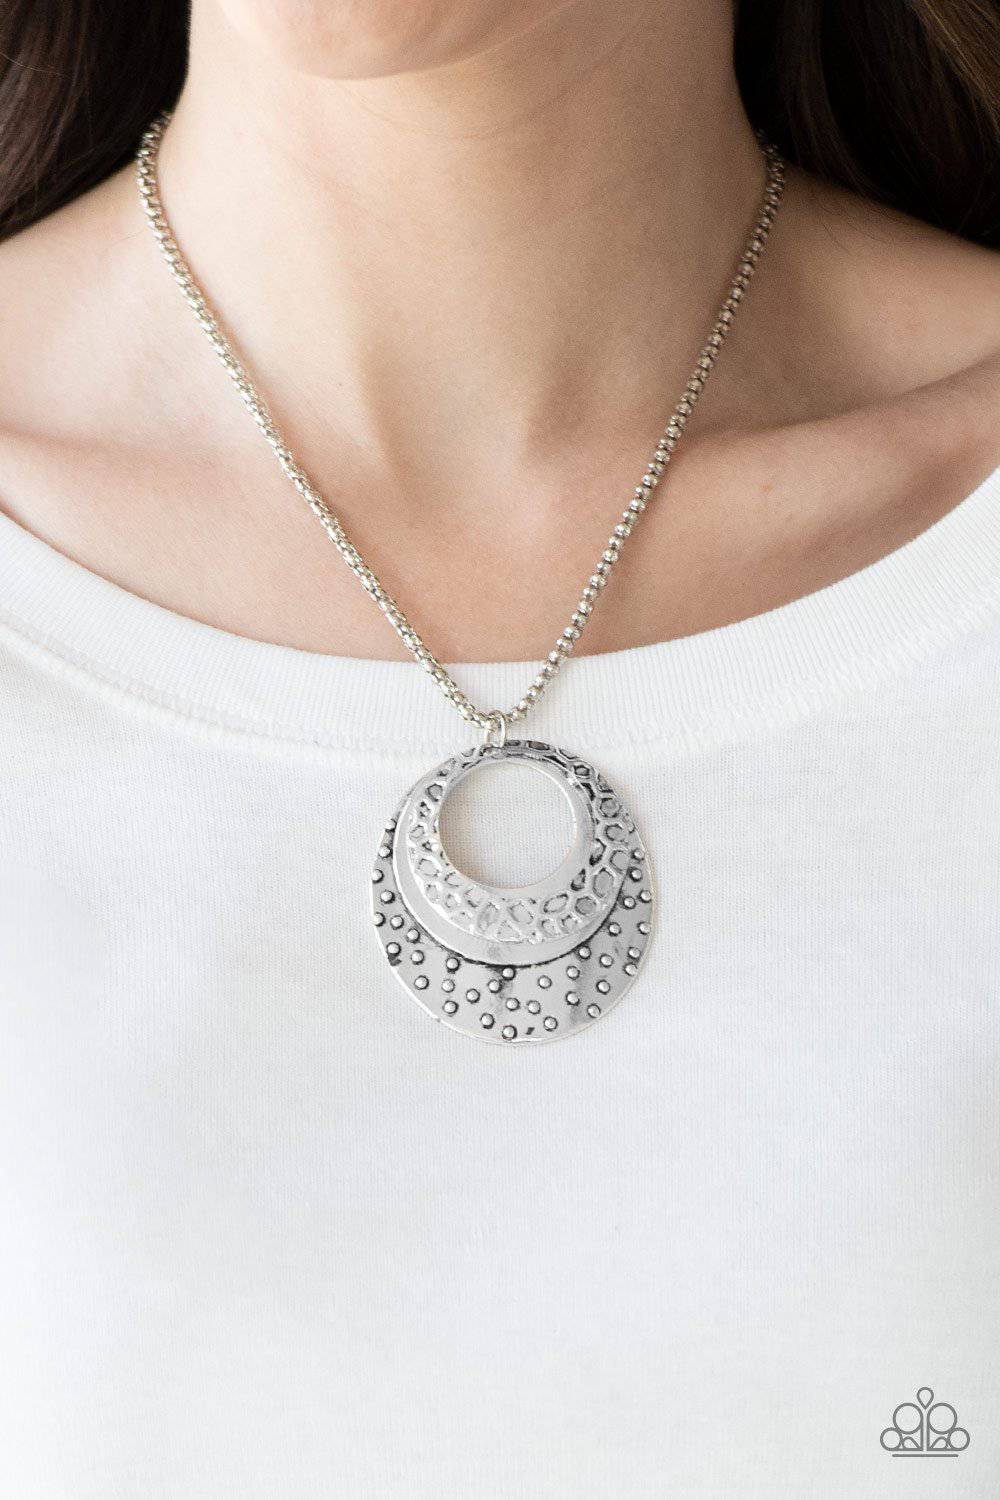 A16 - Texture Trio Silver Necklace by Paparazzi Accessories on Fancy5Fashion.com